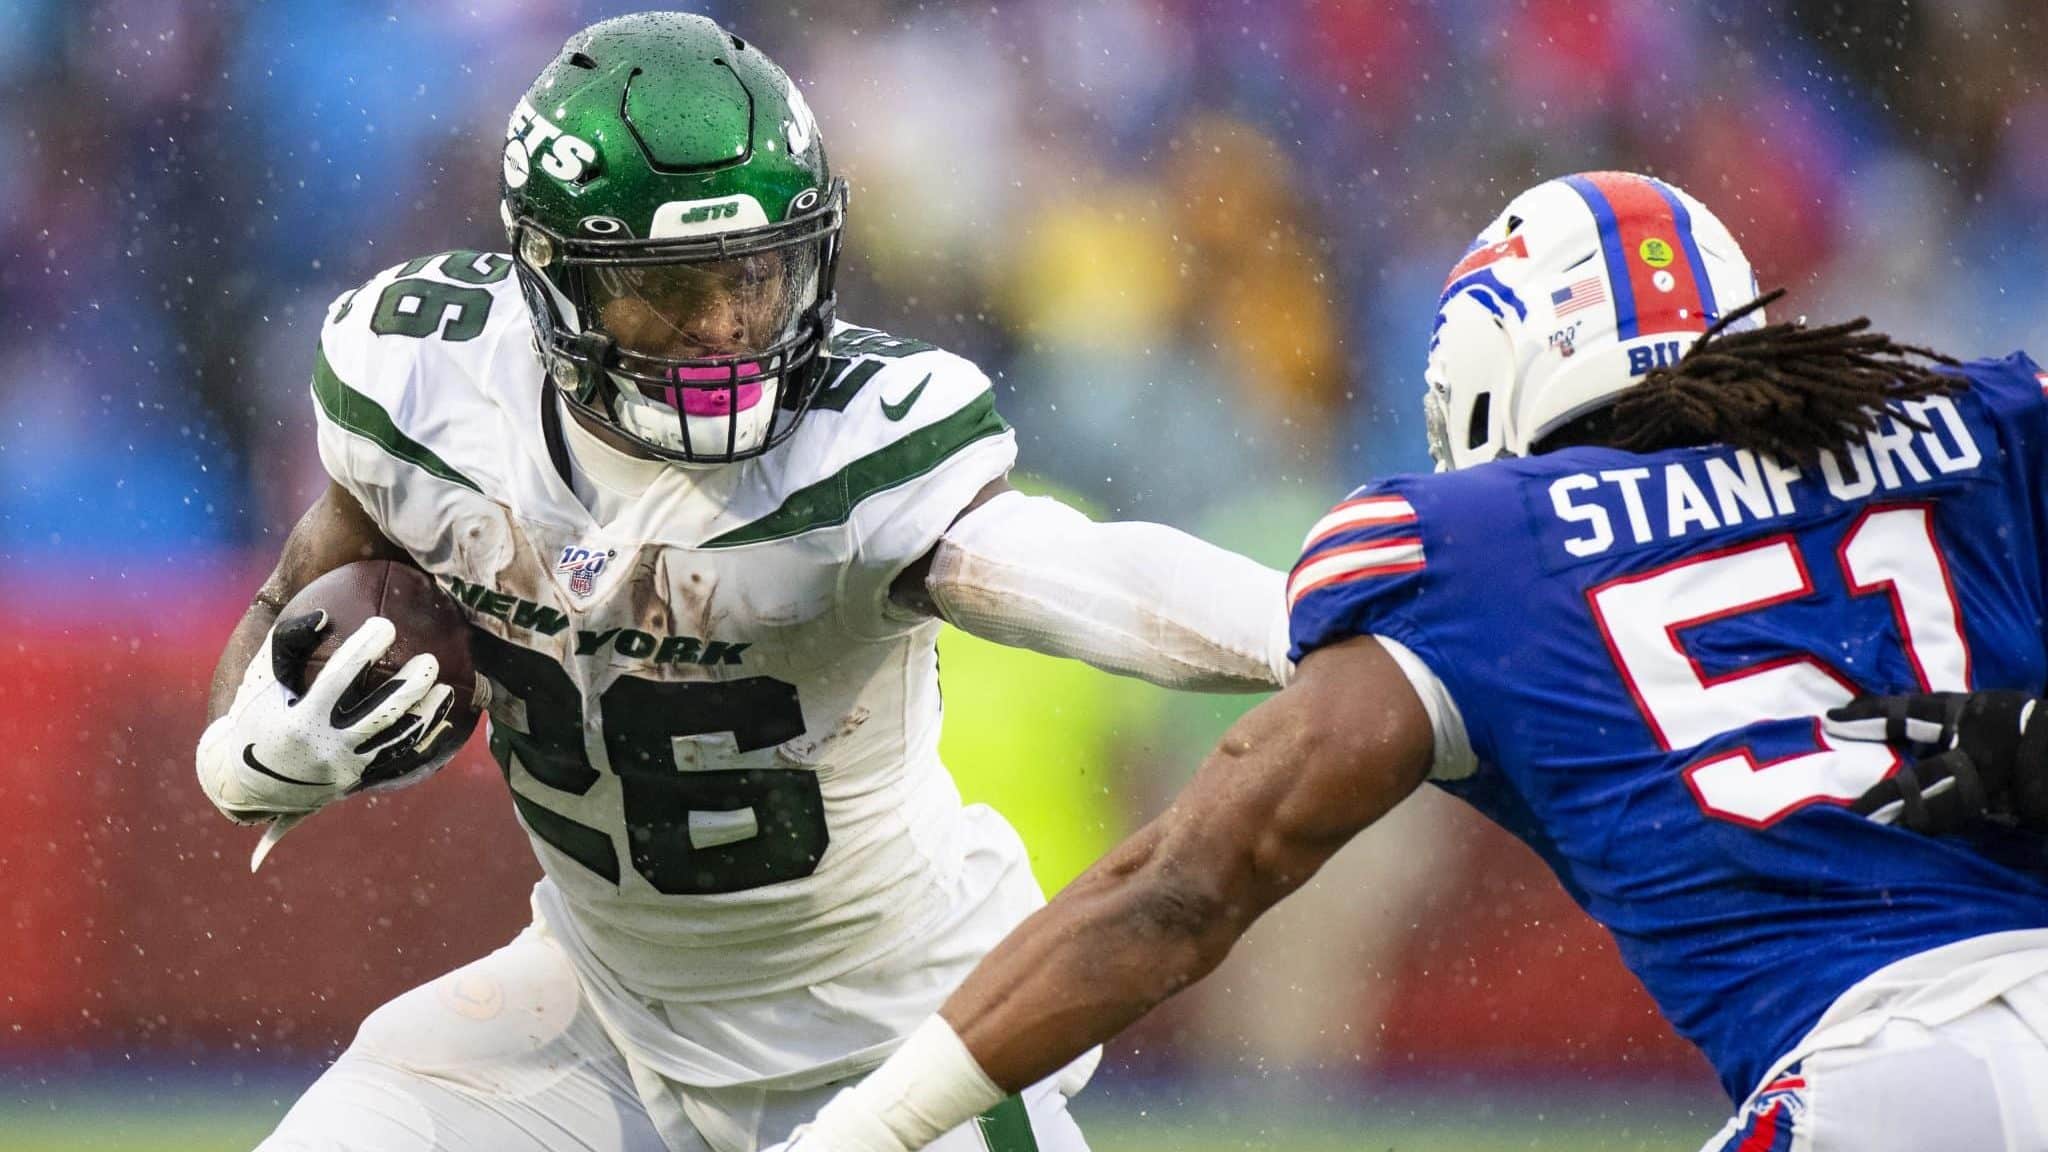 ORCHARD PARK, NY - DECEMBER 29: Le'Veon Bell #26 of the New York Jets delivers a stiff arm against Julian Stanford #51 of the Buffalo Bills during the second quarter at New Era Field on December 29, 2019 in Orchard Park, New York.